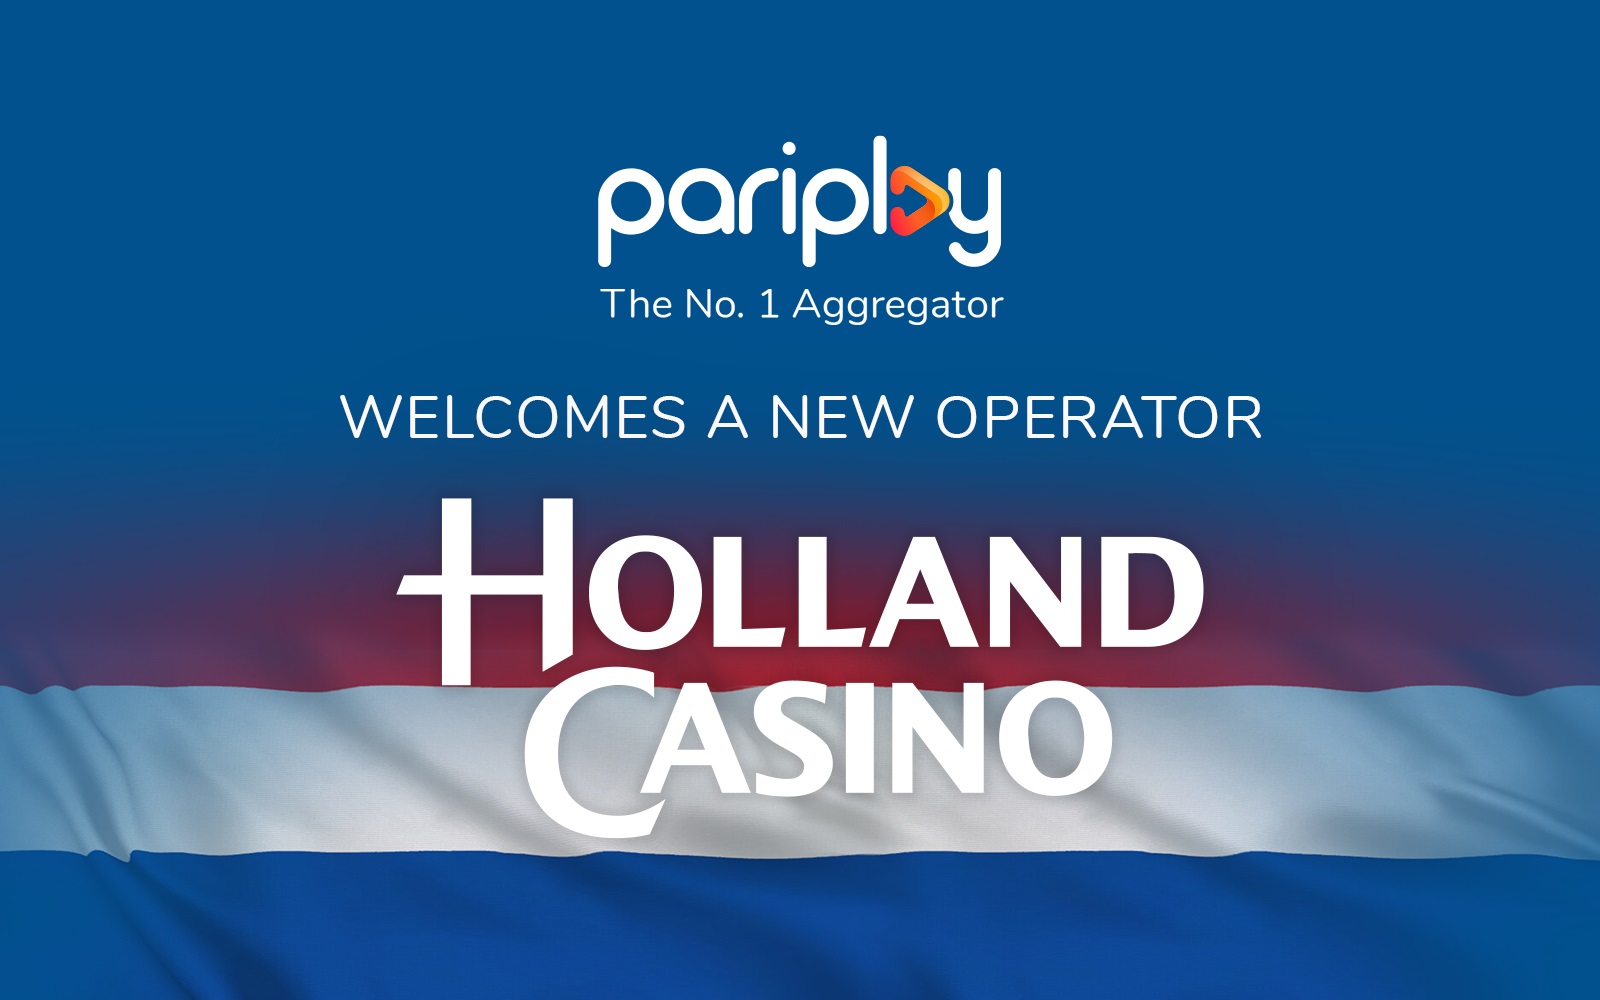 Pariplay signs agreement with Holland Casino